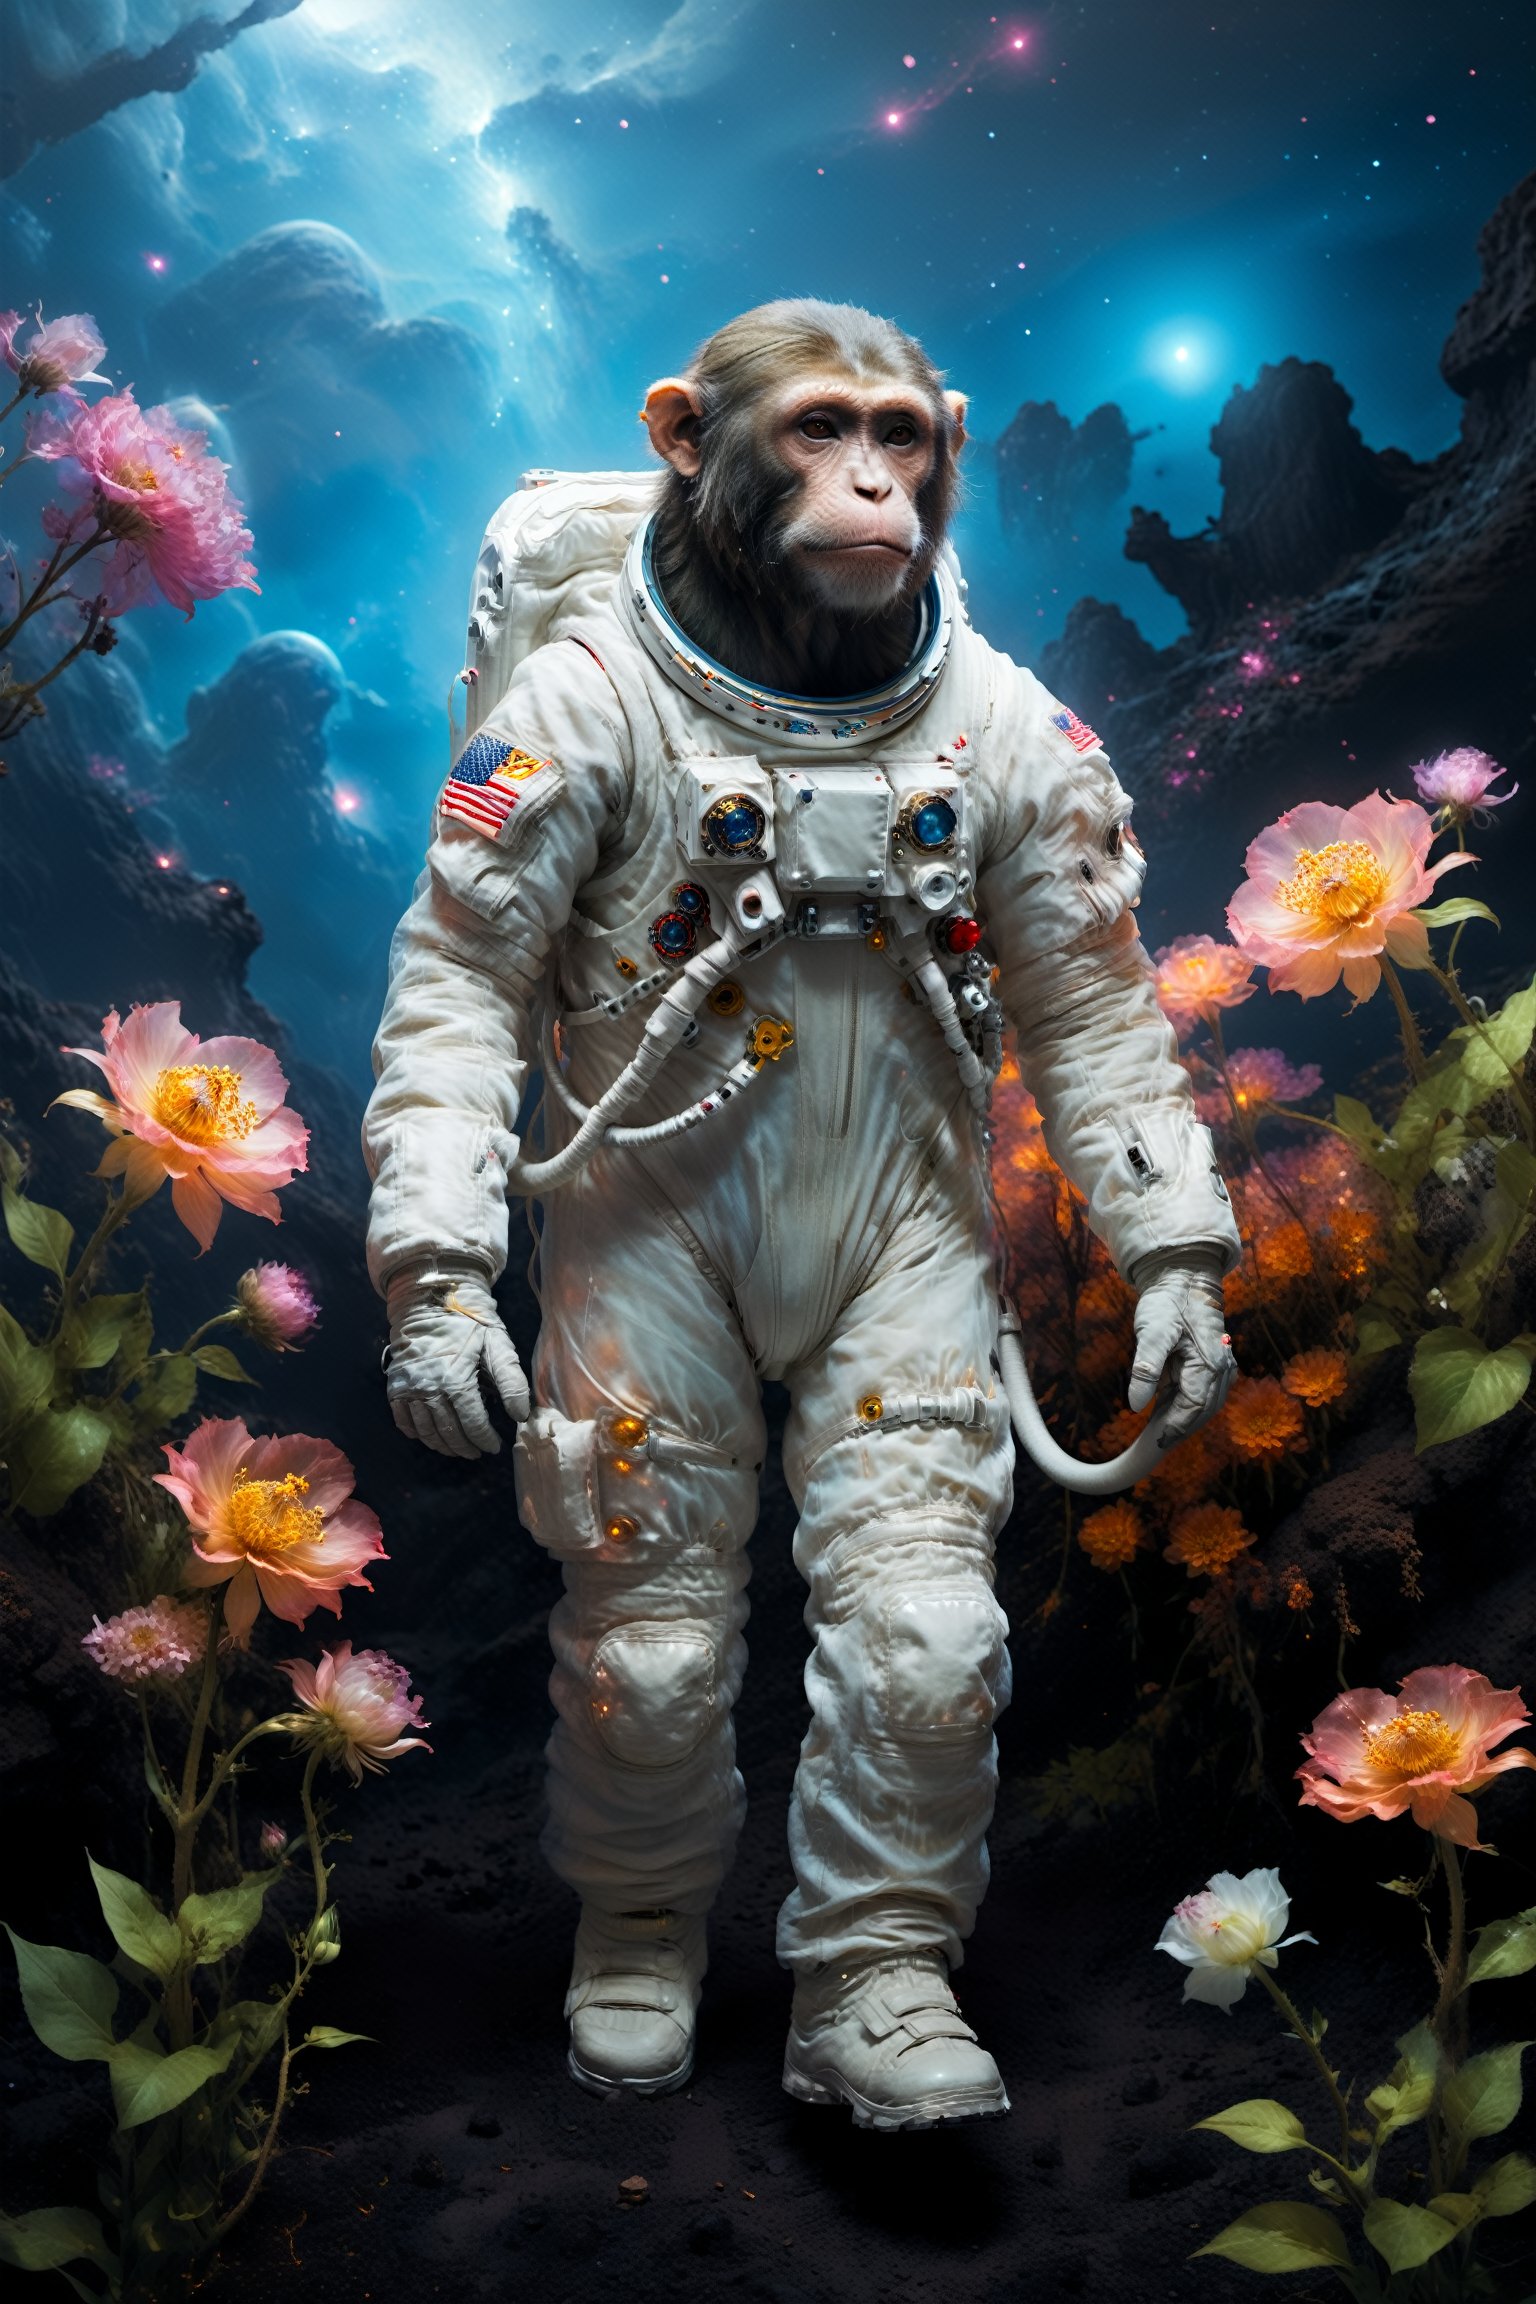 A bioluminescent monkey astronaut in a hi-tech space suit, walking in the dark planet among glowing etheral ghost flowers, surreal photography, cosmic wonder, (by Tim Walker & NASA & Salvador Dali), neon colors, high contrast, featured on National Geographic, outer space scene, realistic details, high resolution